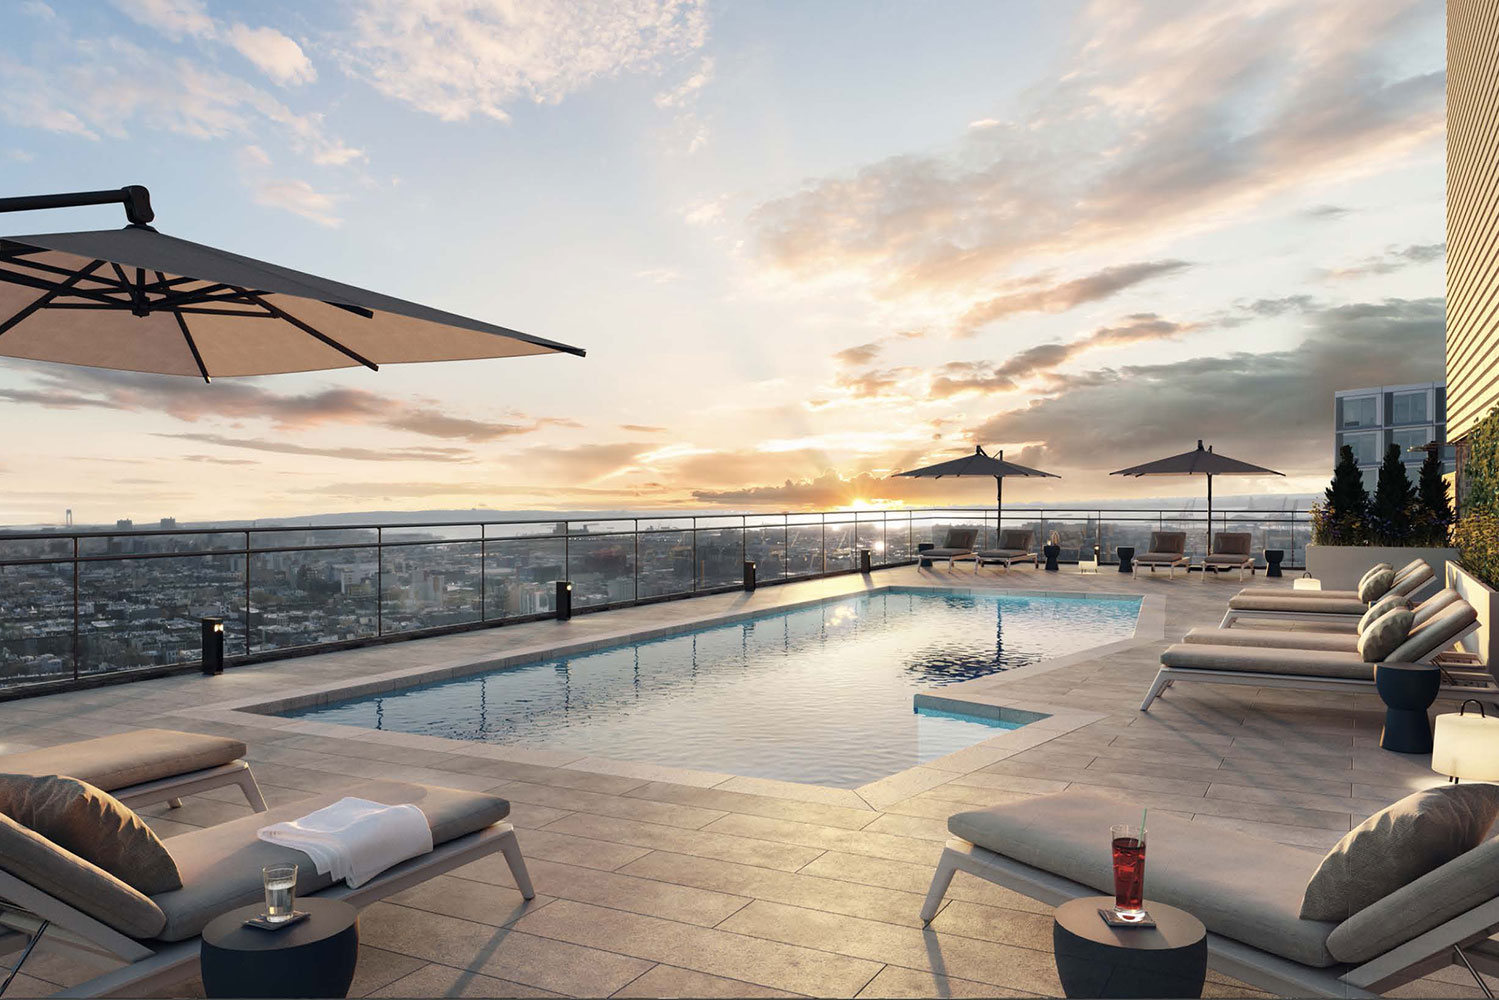 Rooftop pool at Plank Road with chaise lounges and beautiful view